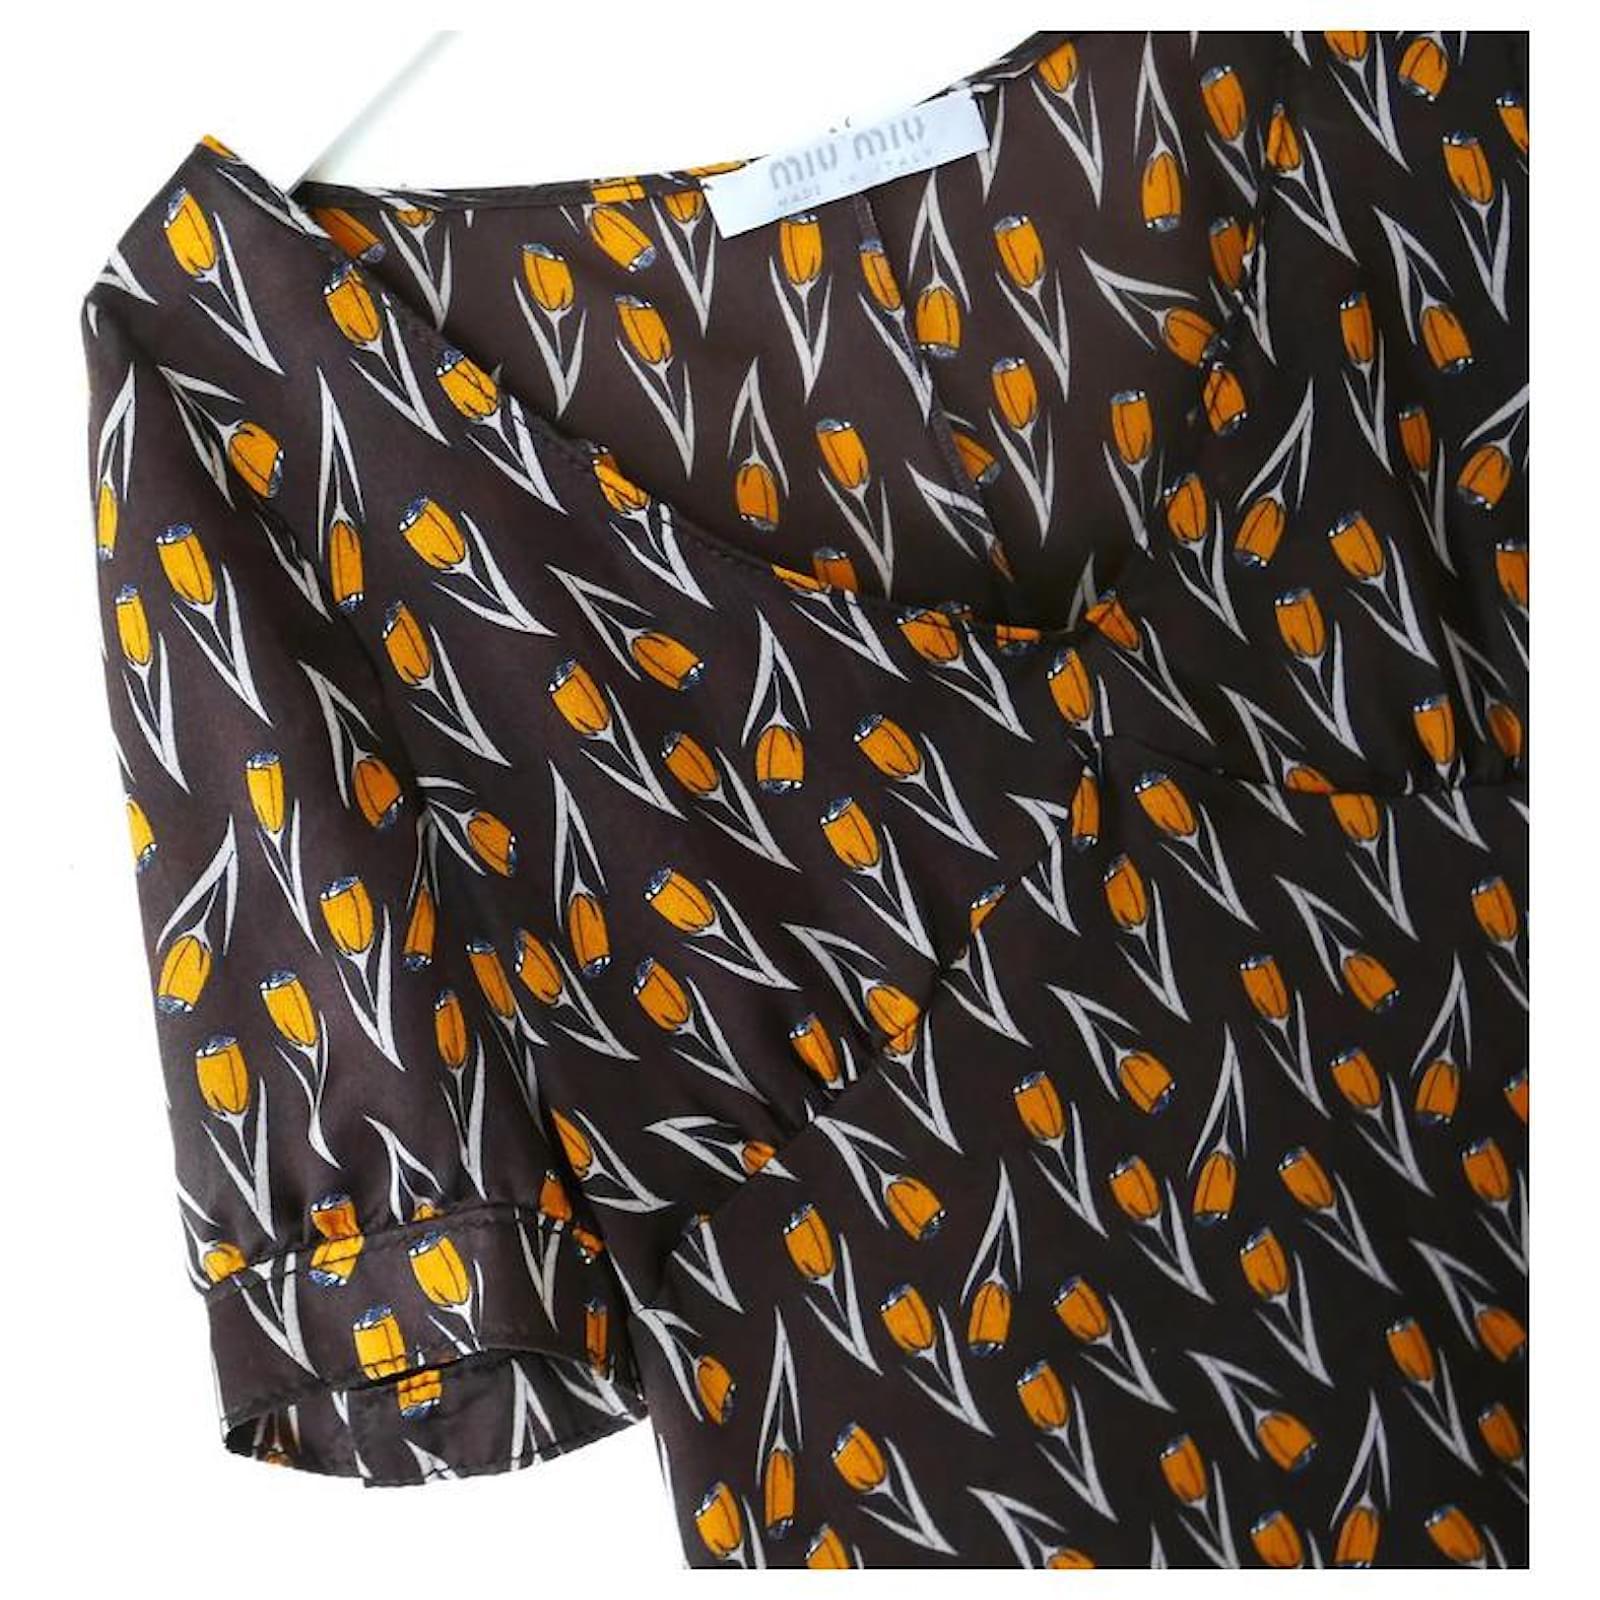 Super rare, beautiful Miu Miu vintage blouse from the Fall 2000 Collection. I superb vintage condition. Made from fine, delicate brown crepe de chine silk with a gorgeous orange floral print. 
it has a 1930s inspired cut with shaped bust panels and